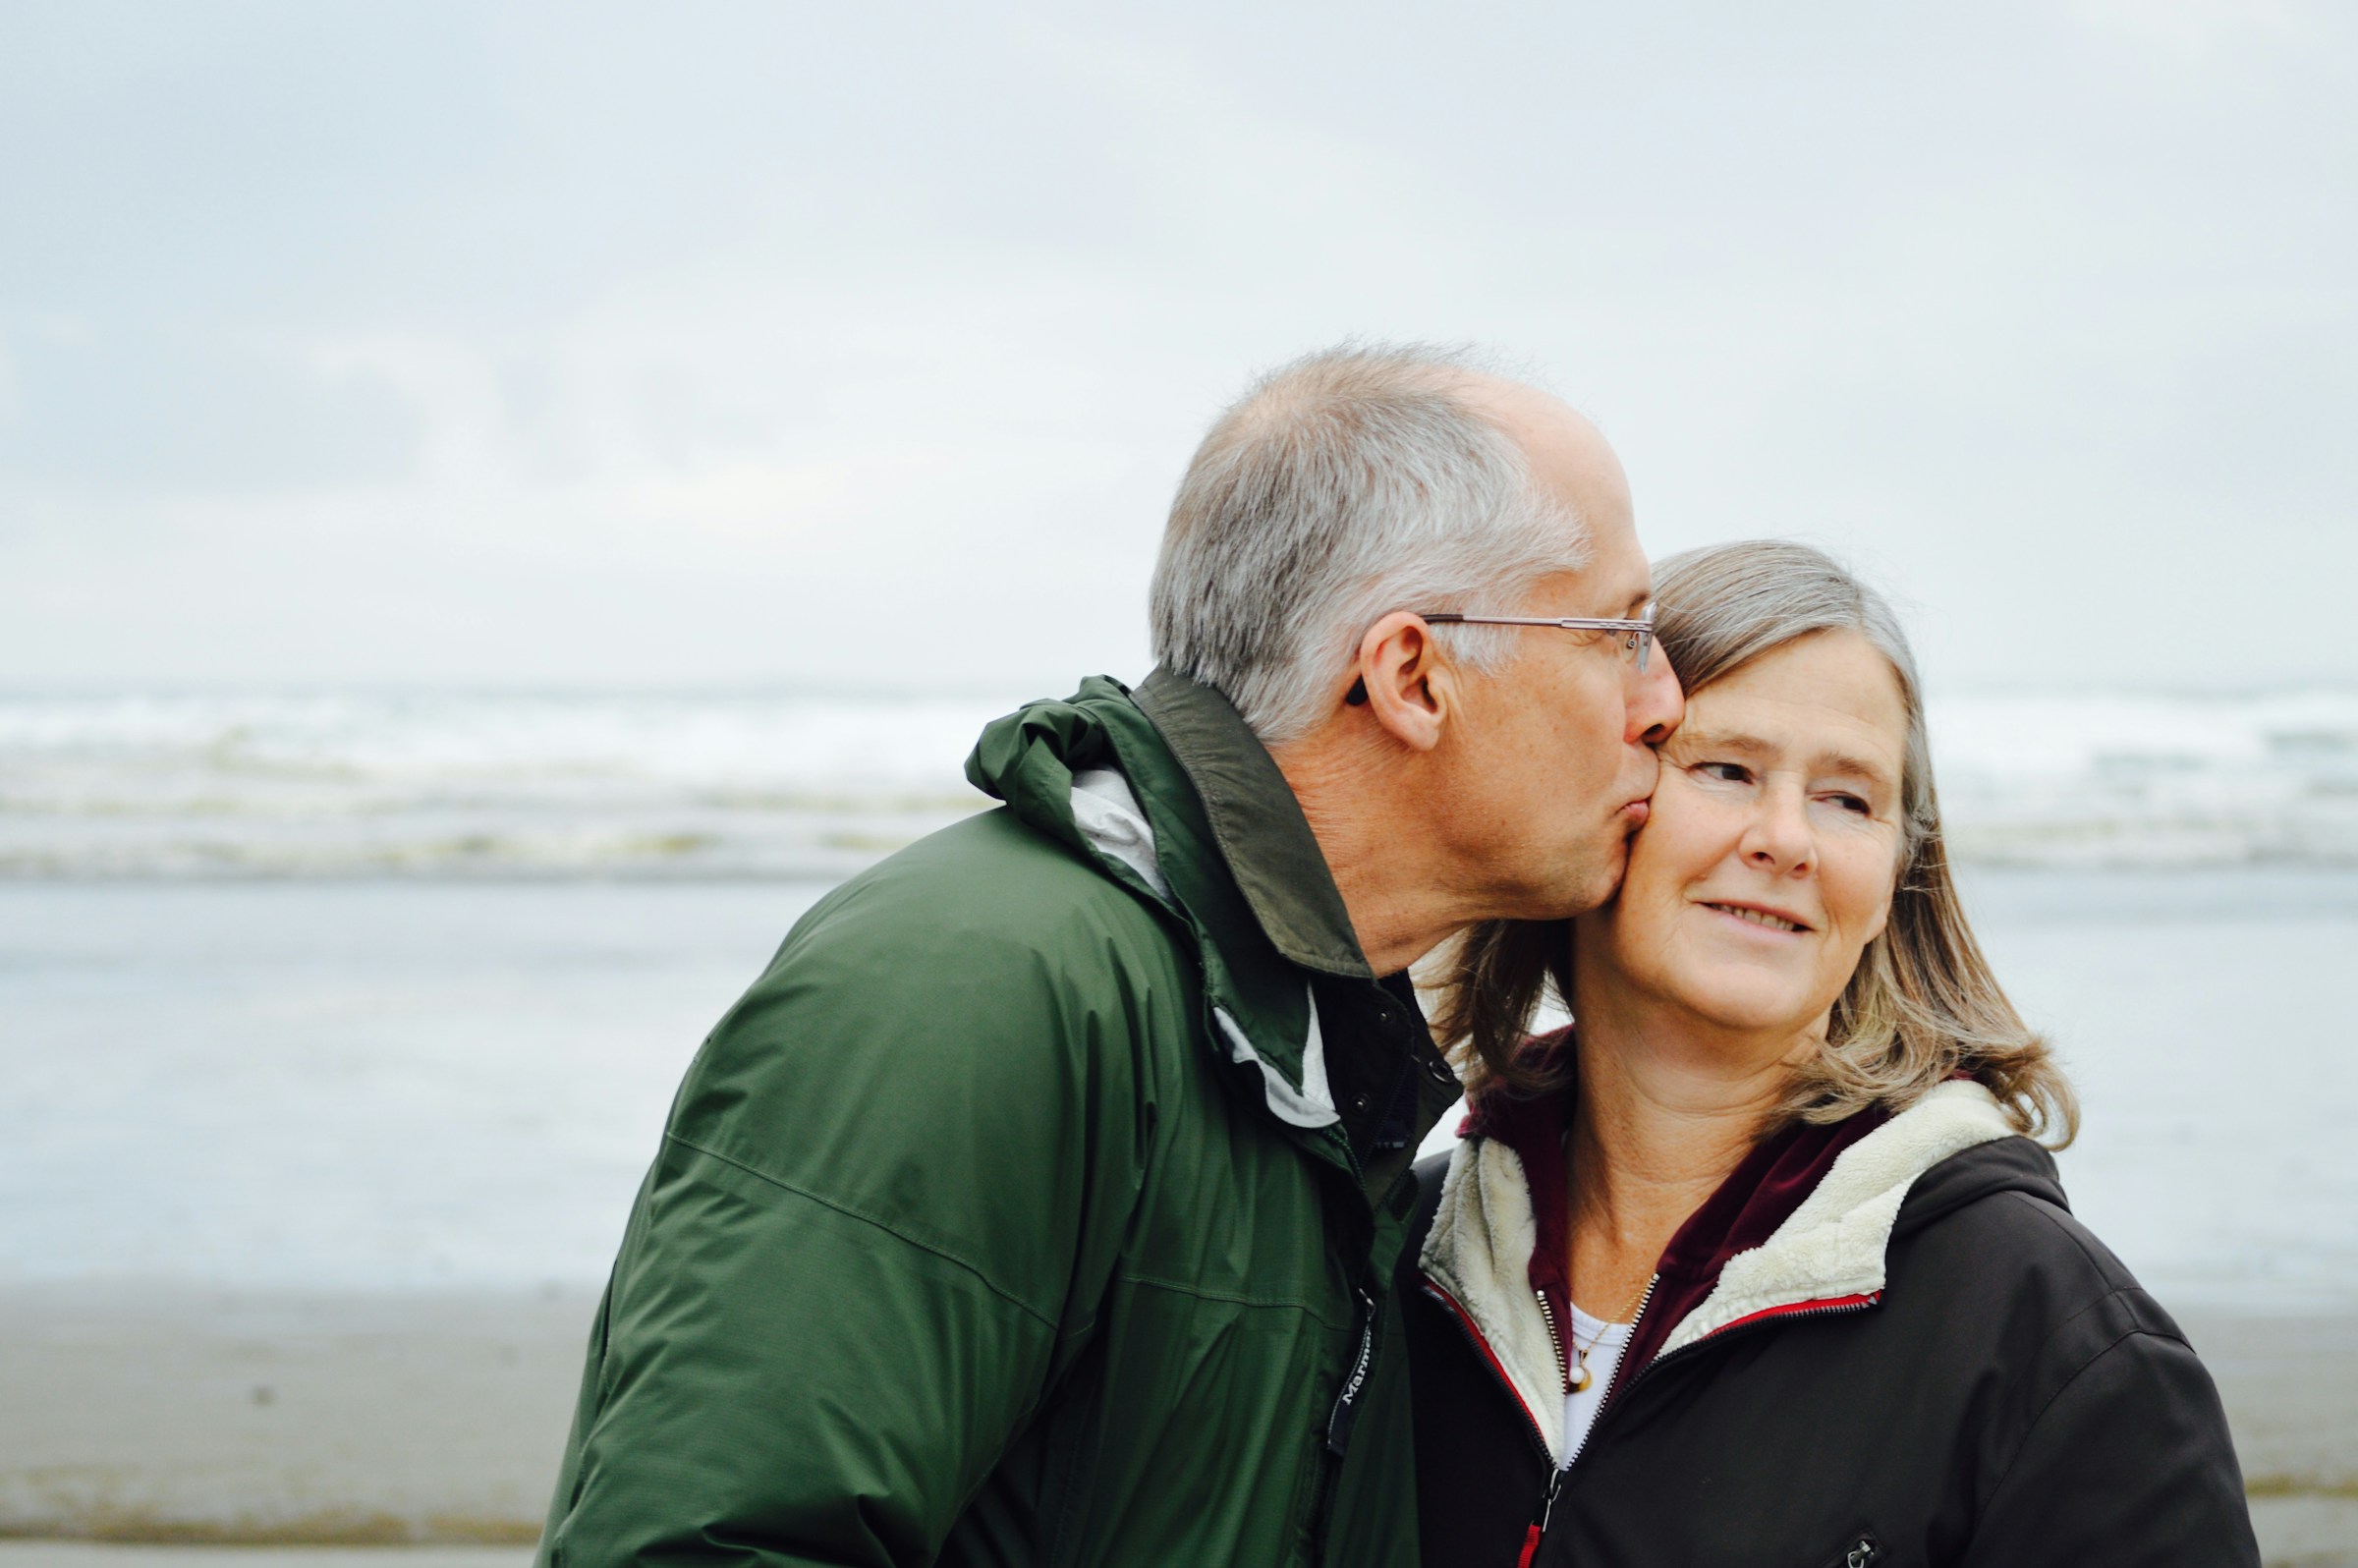 An elderly couple at the beach | Source: Pexels